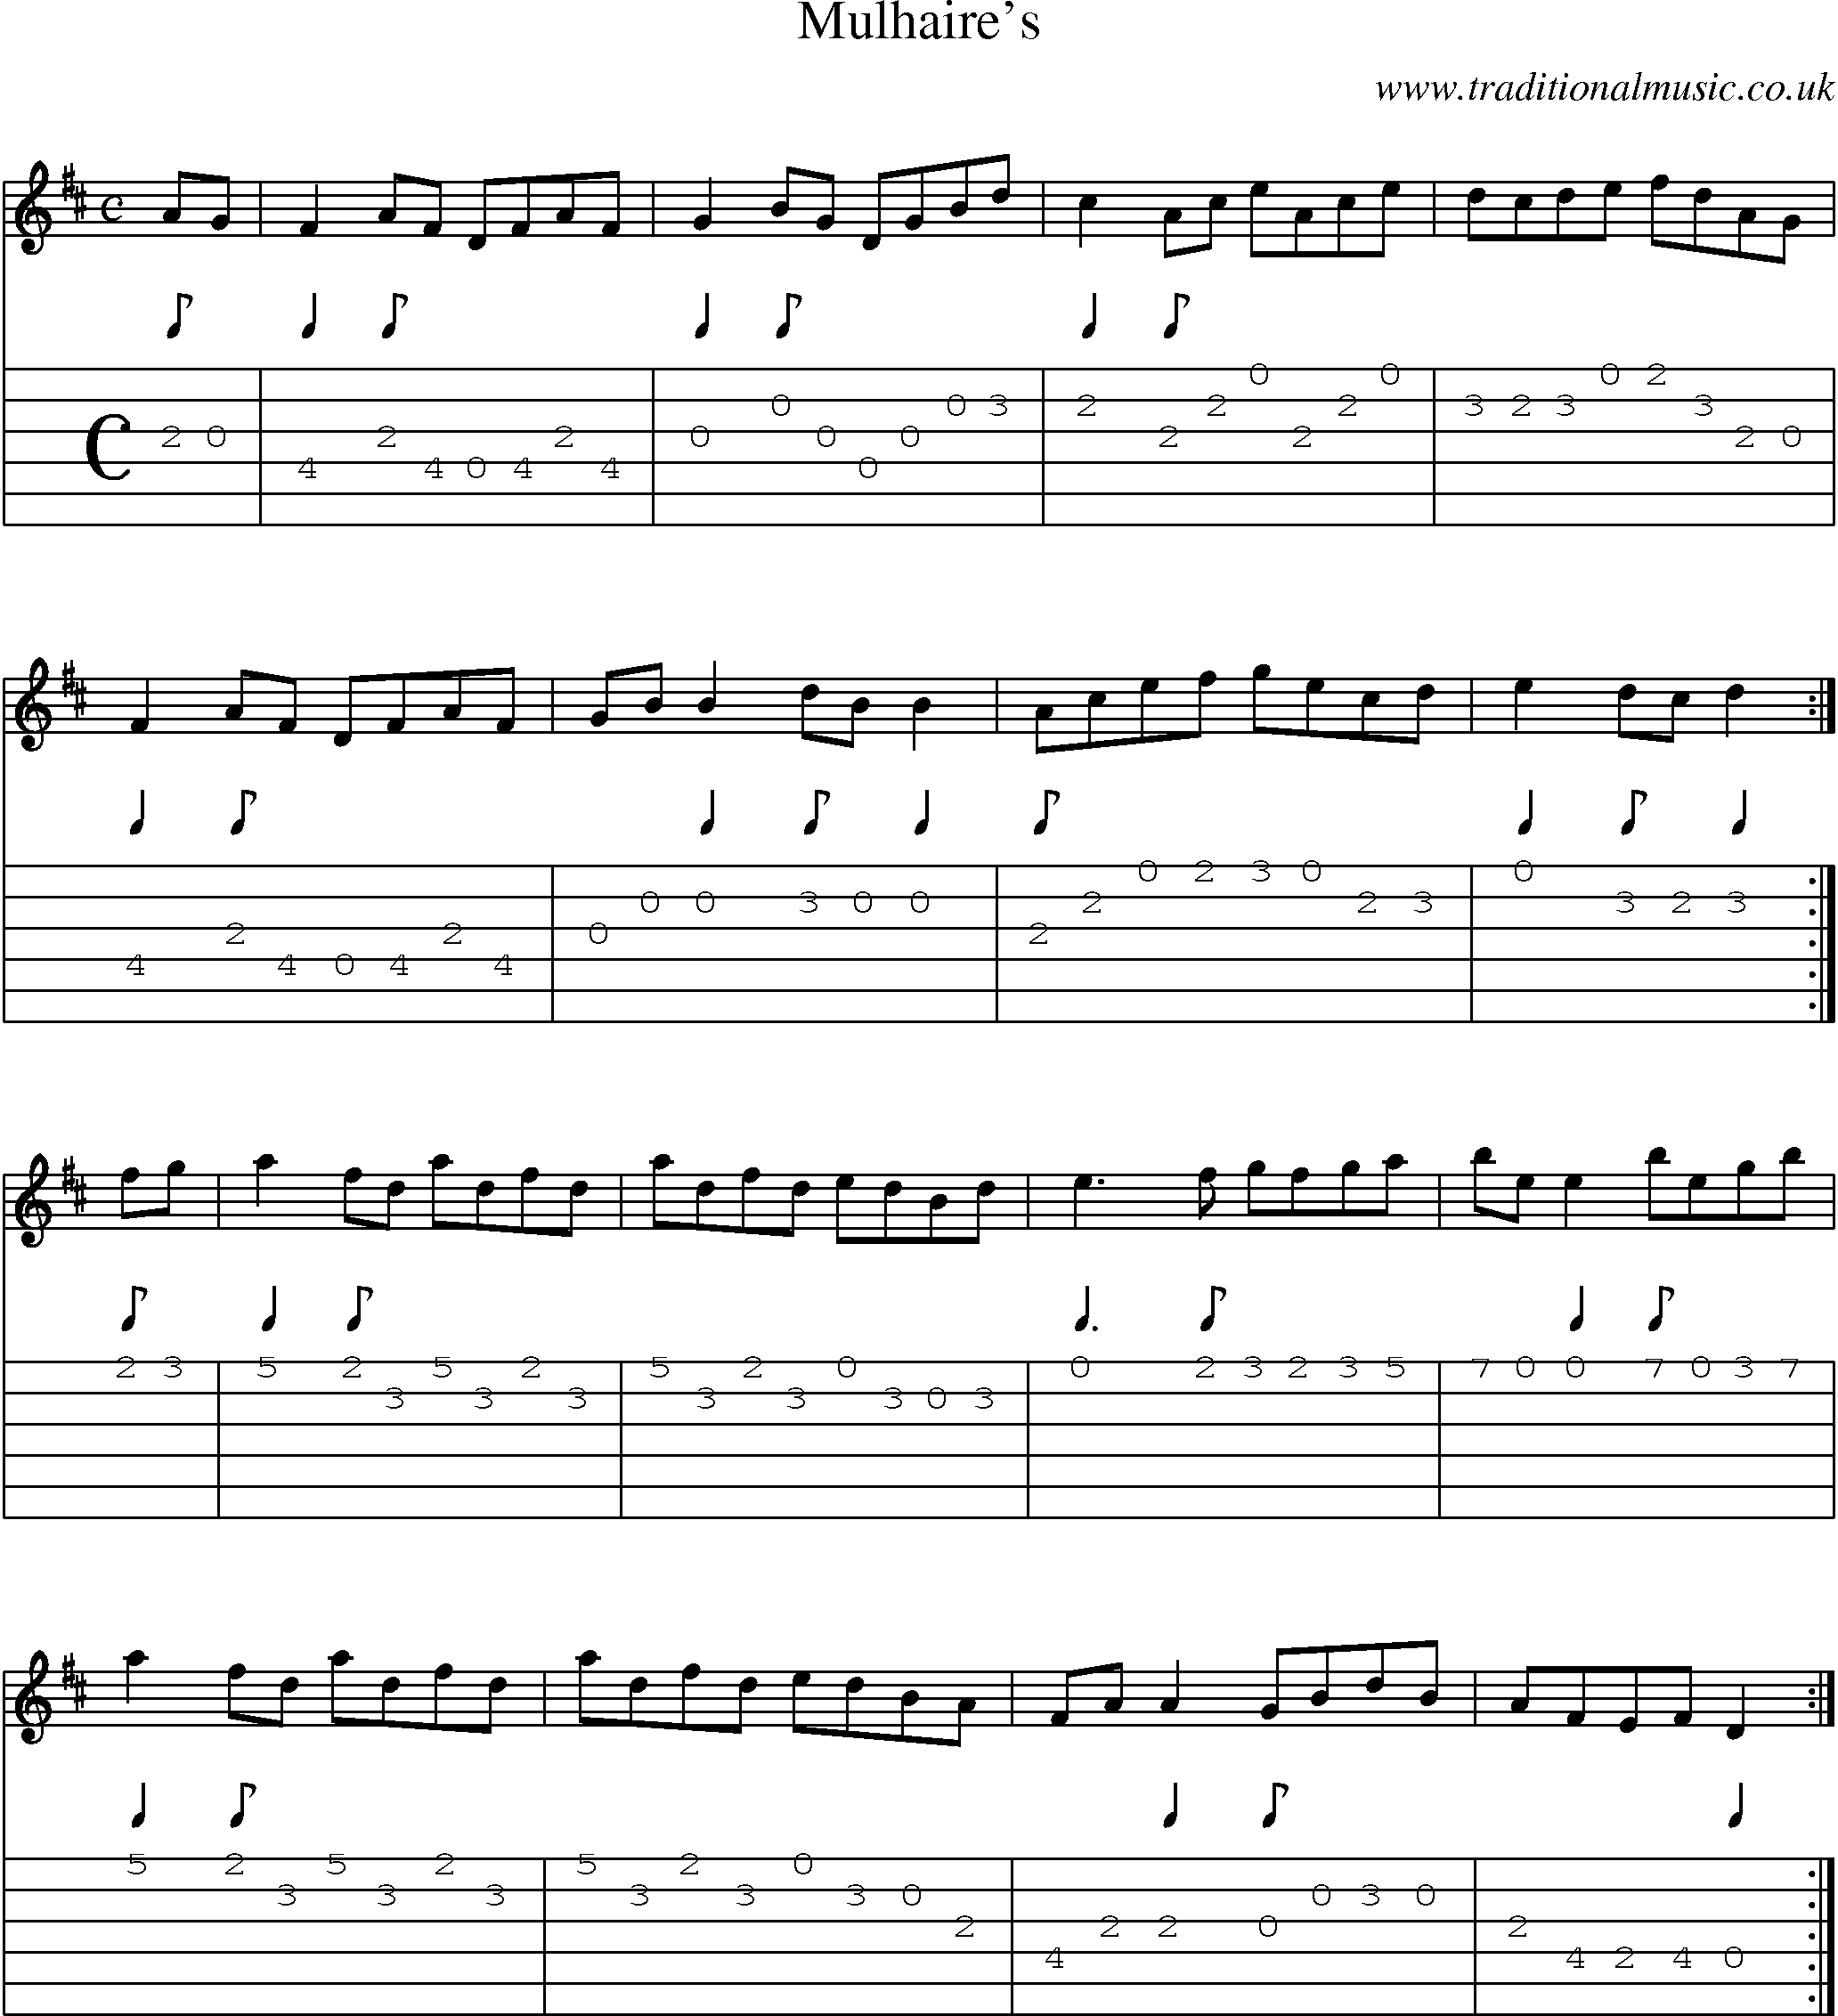 Music Score and Guitar Tabs for Mulhaires